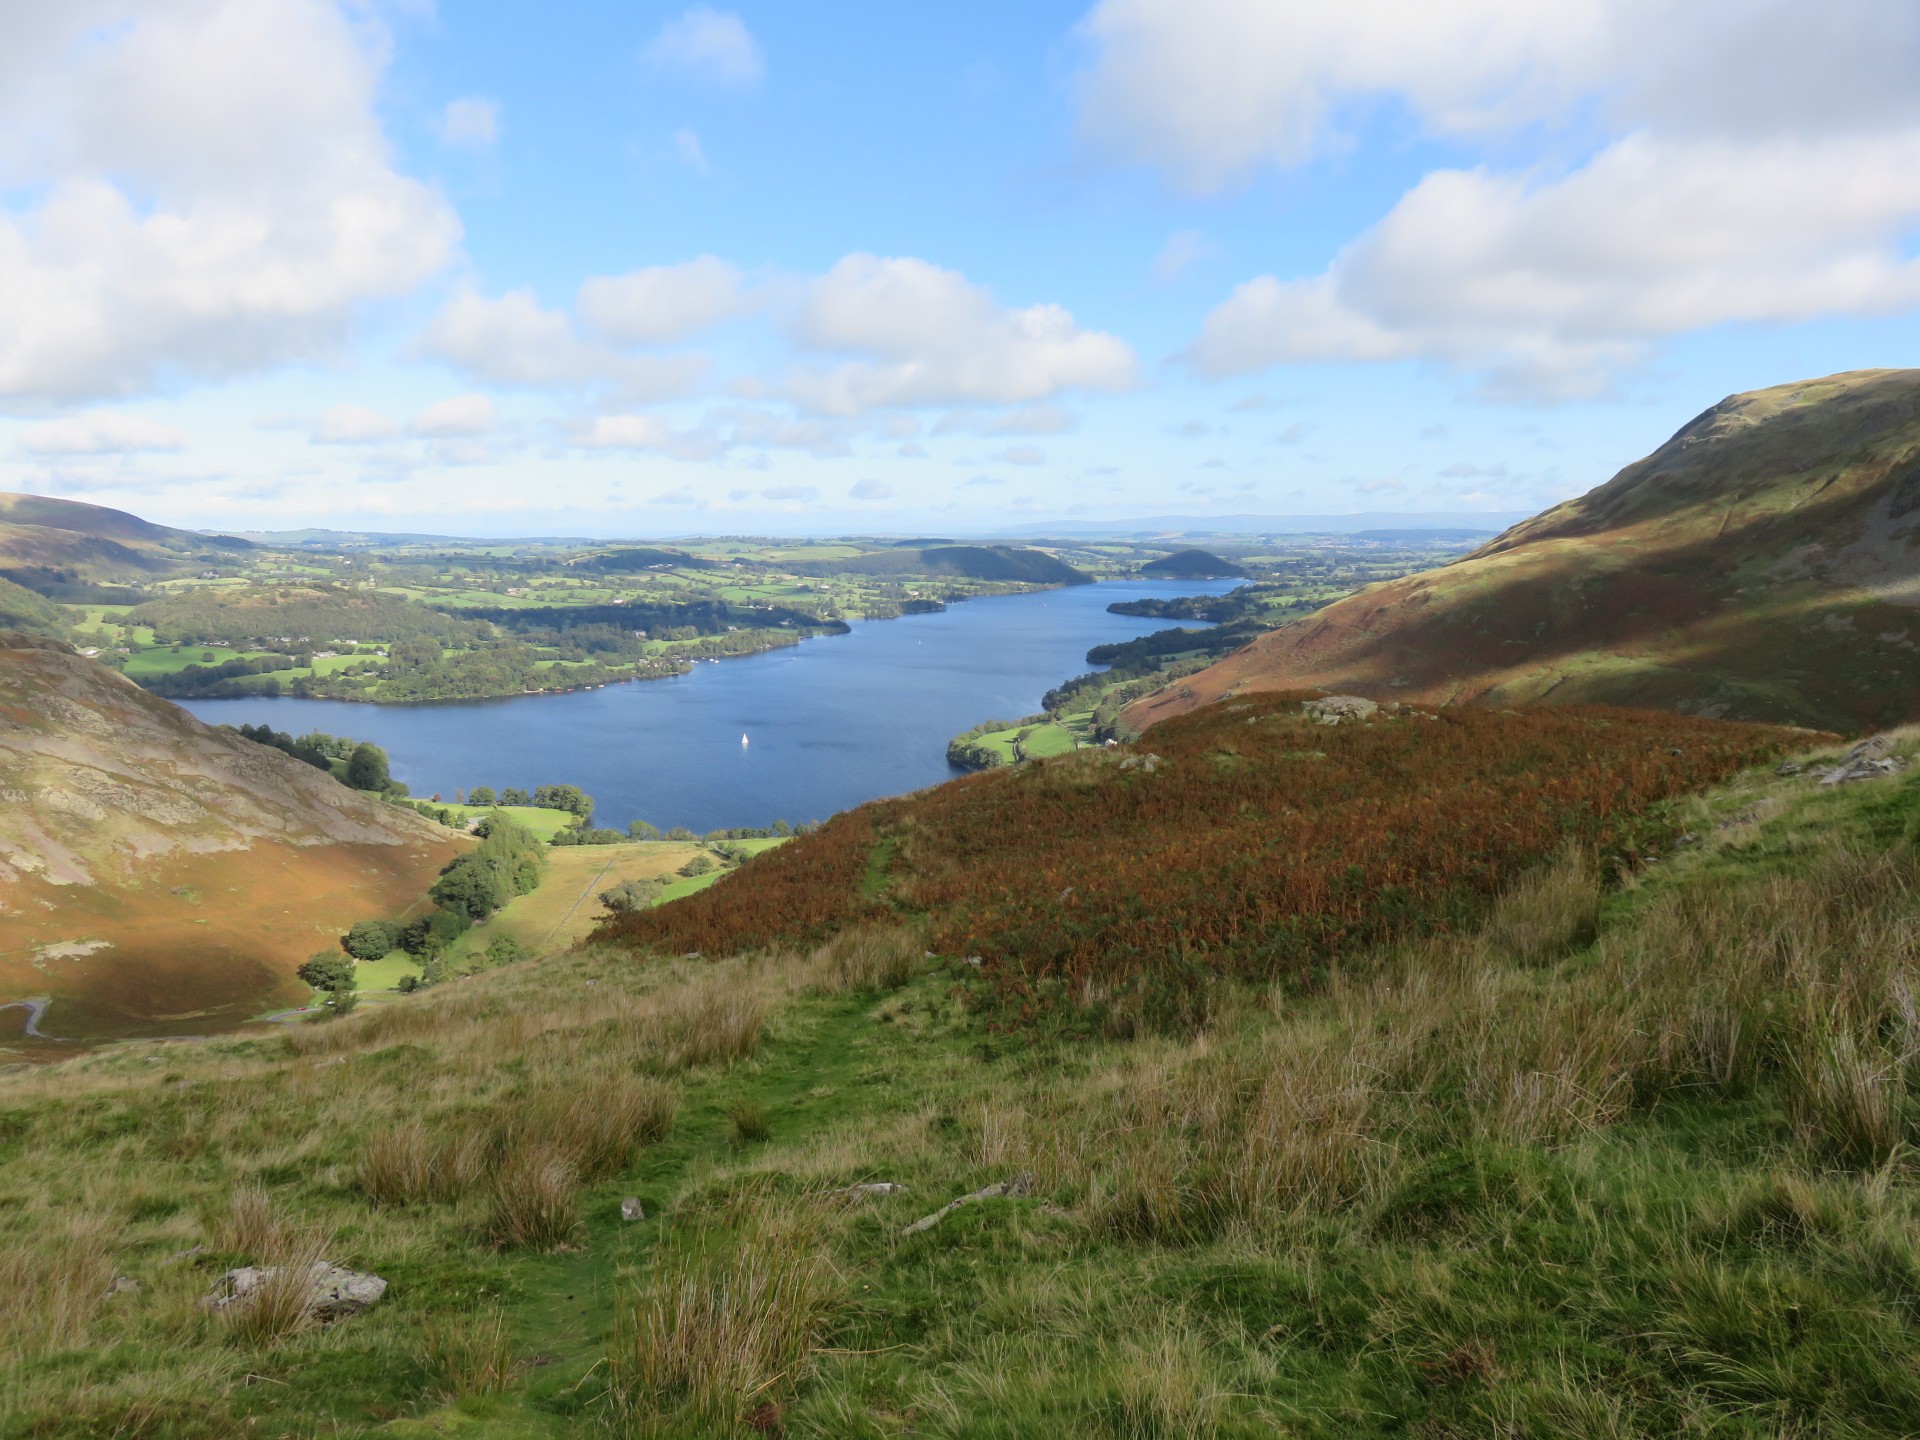 Great view along Ullswater